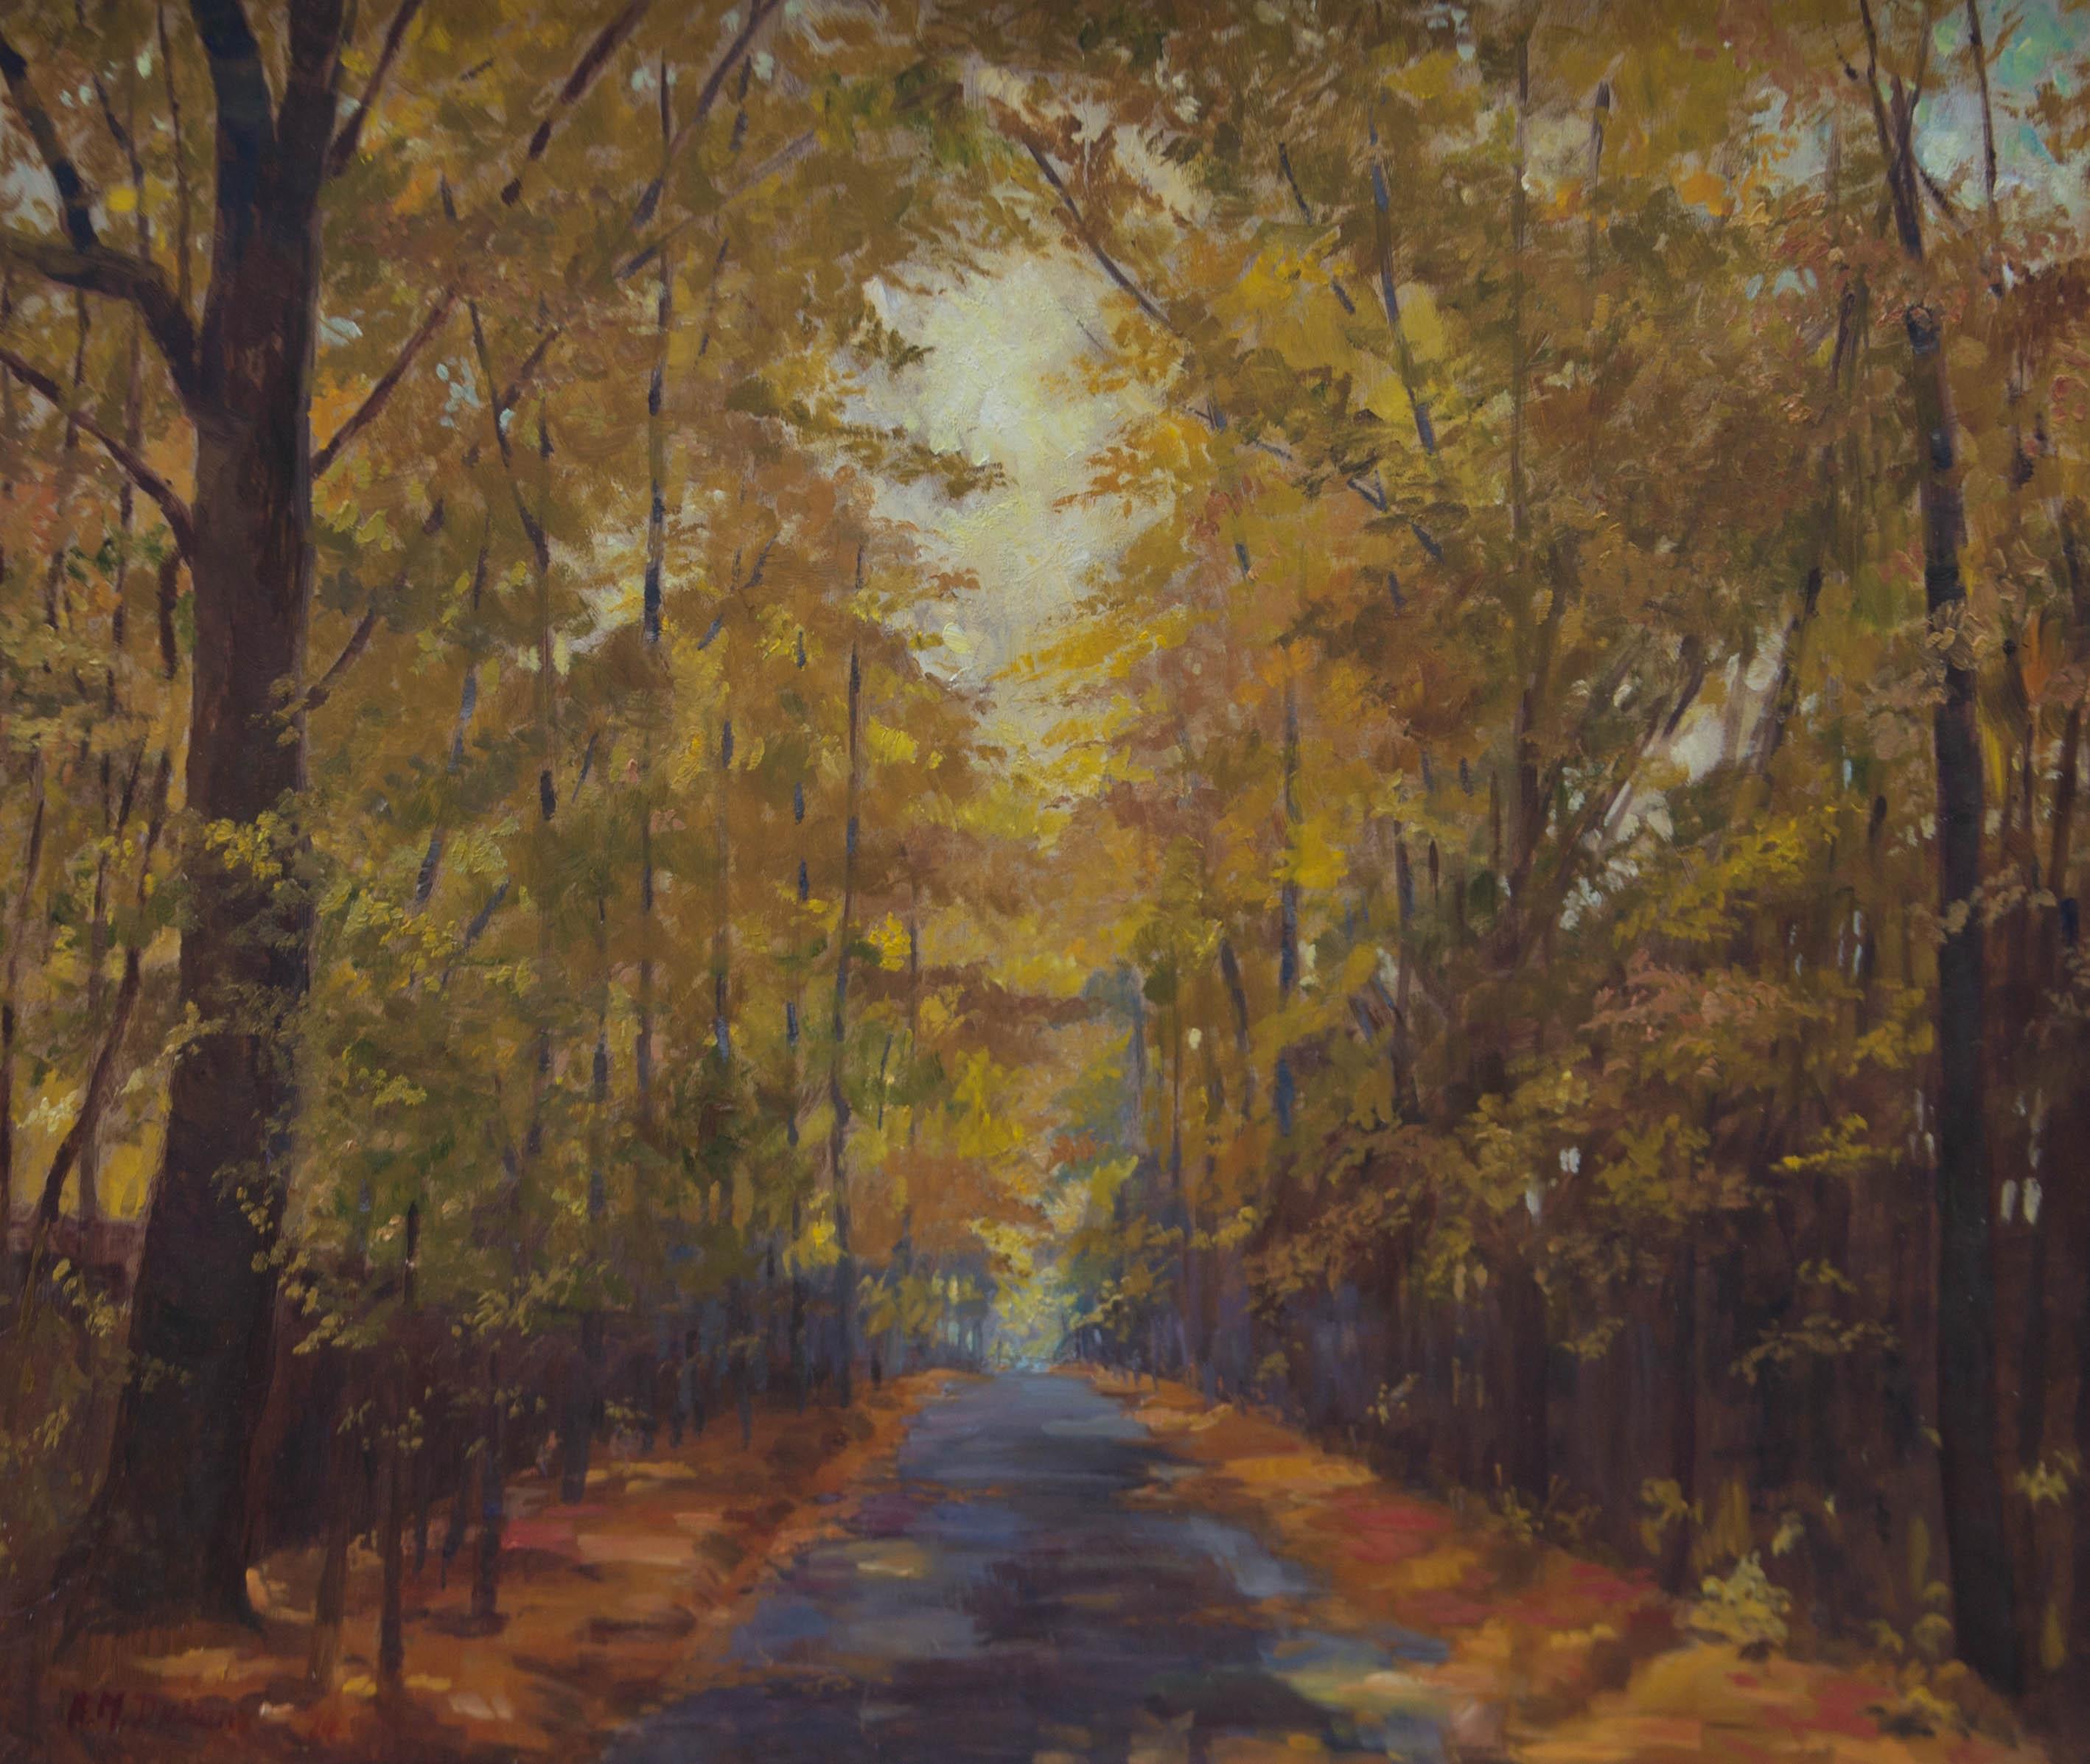 The sun gleams through autumnal trees in this fine oil study.

Signed.

Well presented in a molded wood frame with a linen slip.

On Board.